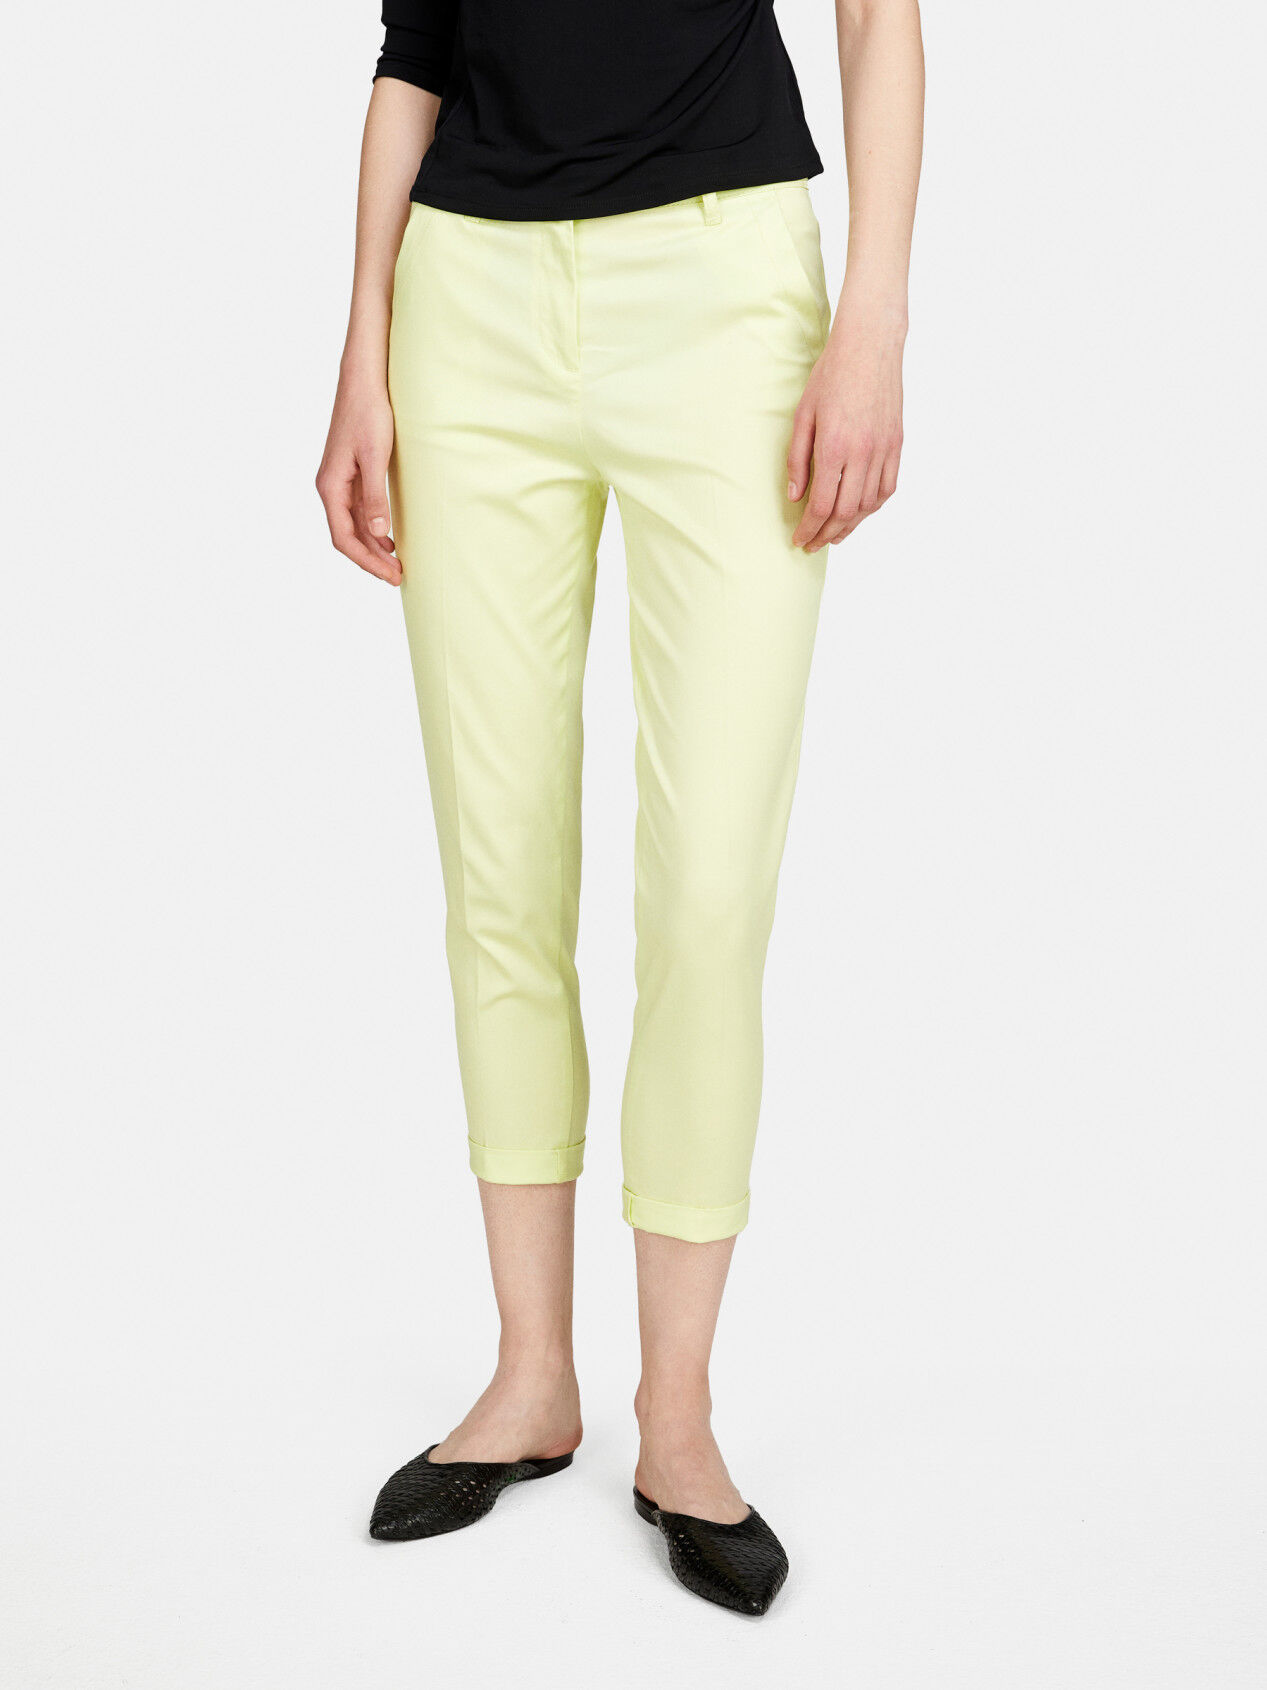 Cigarette trousers with belt COLOUR yellow green - RESERVED - ZR533-71X